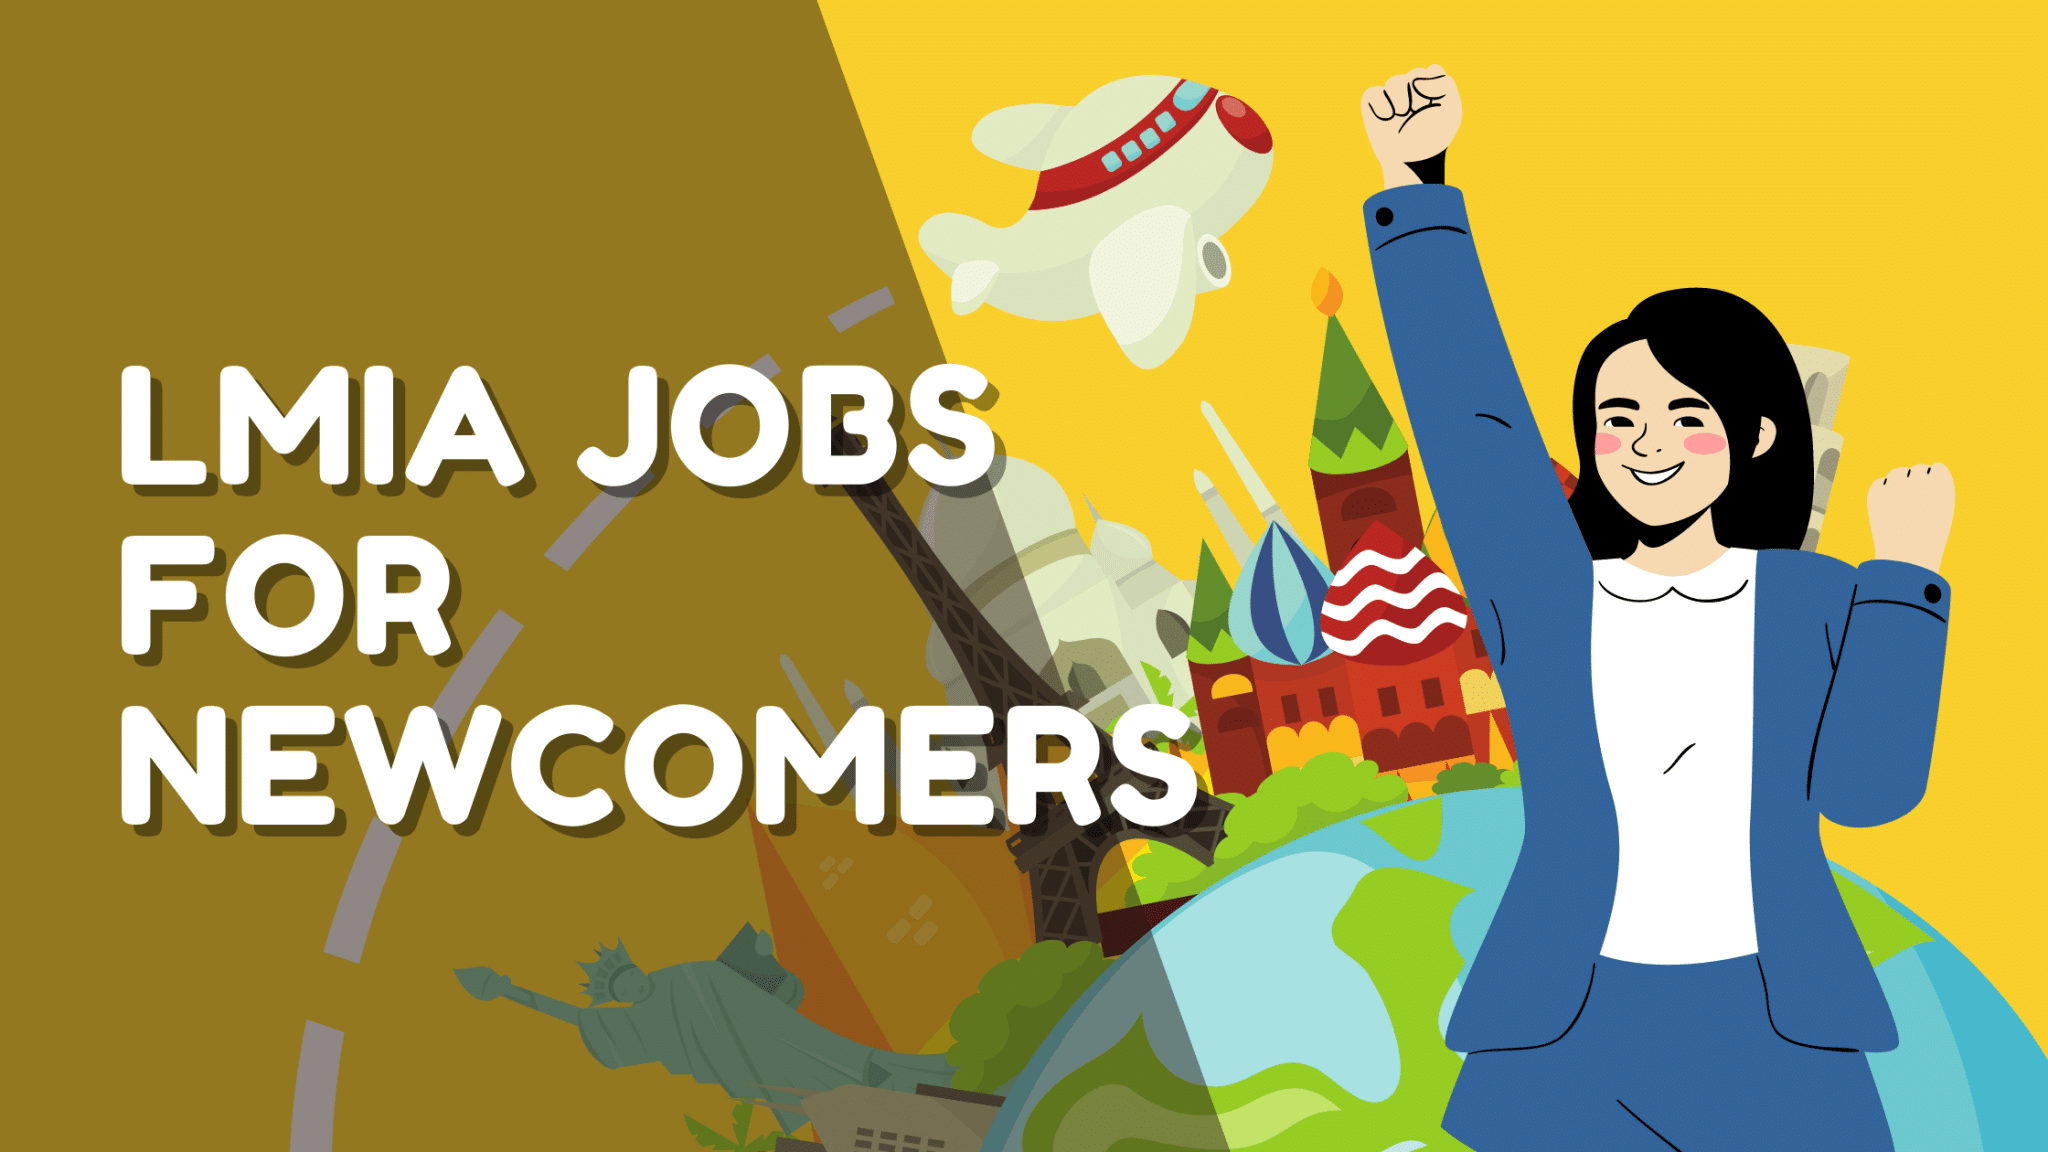 Lima jobs for newcomers looking for work.